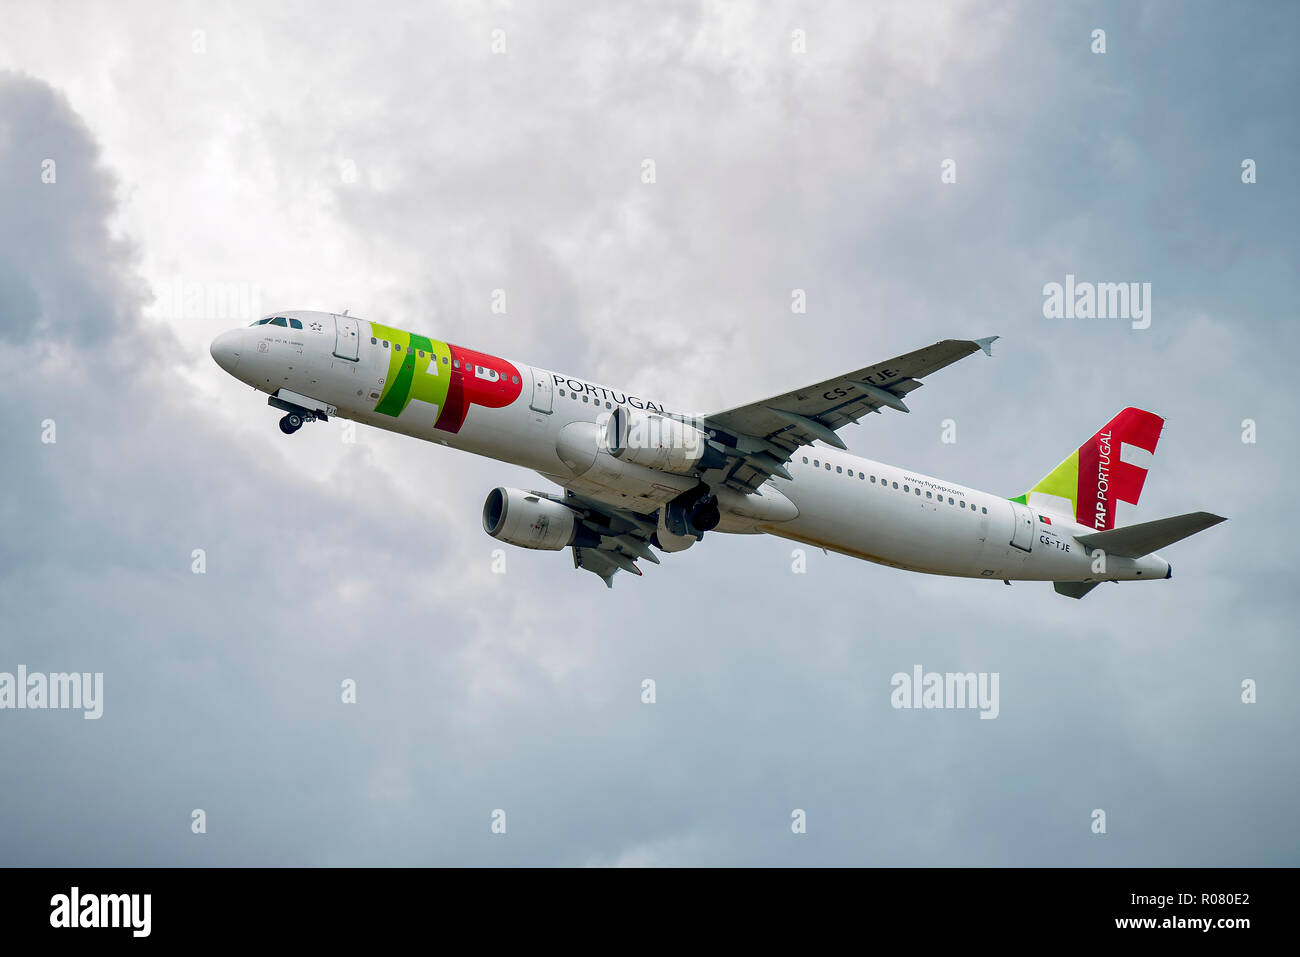 Airbus A321 (CS-TJE) aircraft from TAP Air Portugal take off against dark clouds Stock Photo